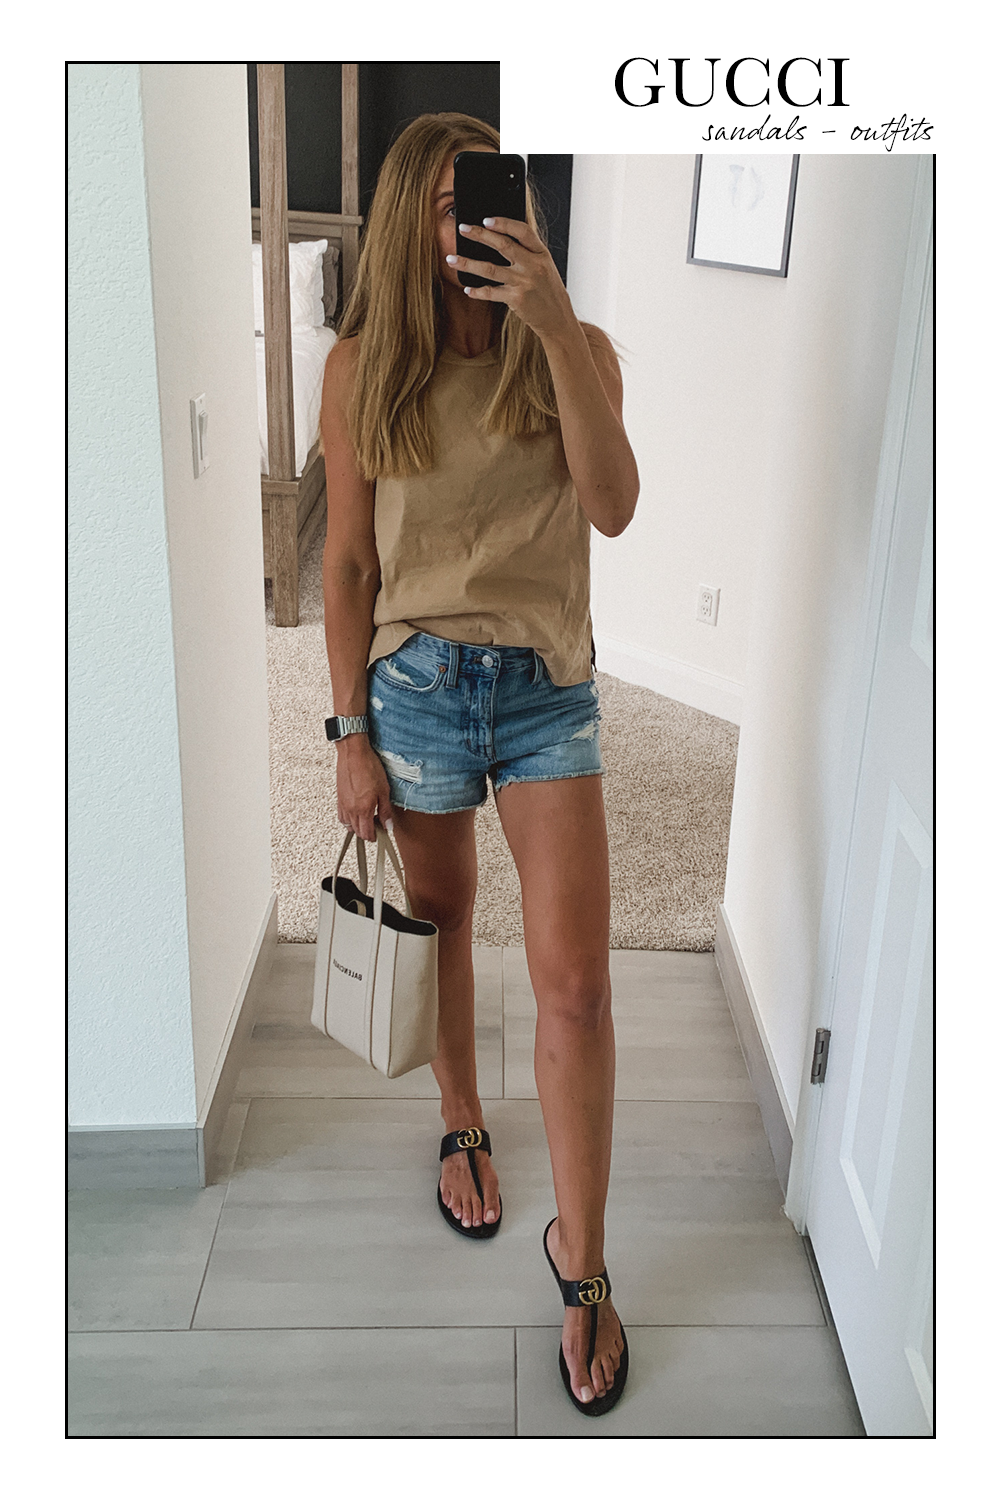 Today - #Gucci top, #J_Brand shorts, #Prada sandals and #LV